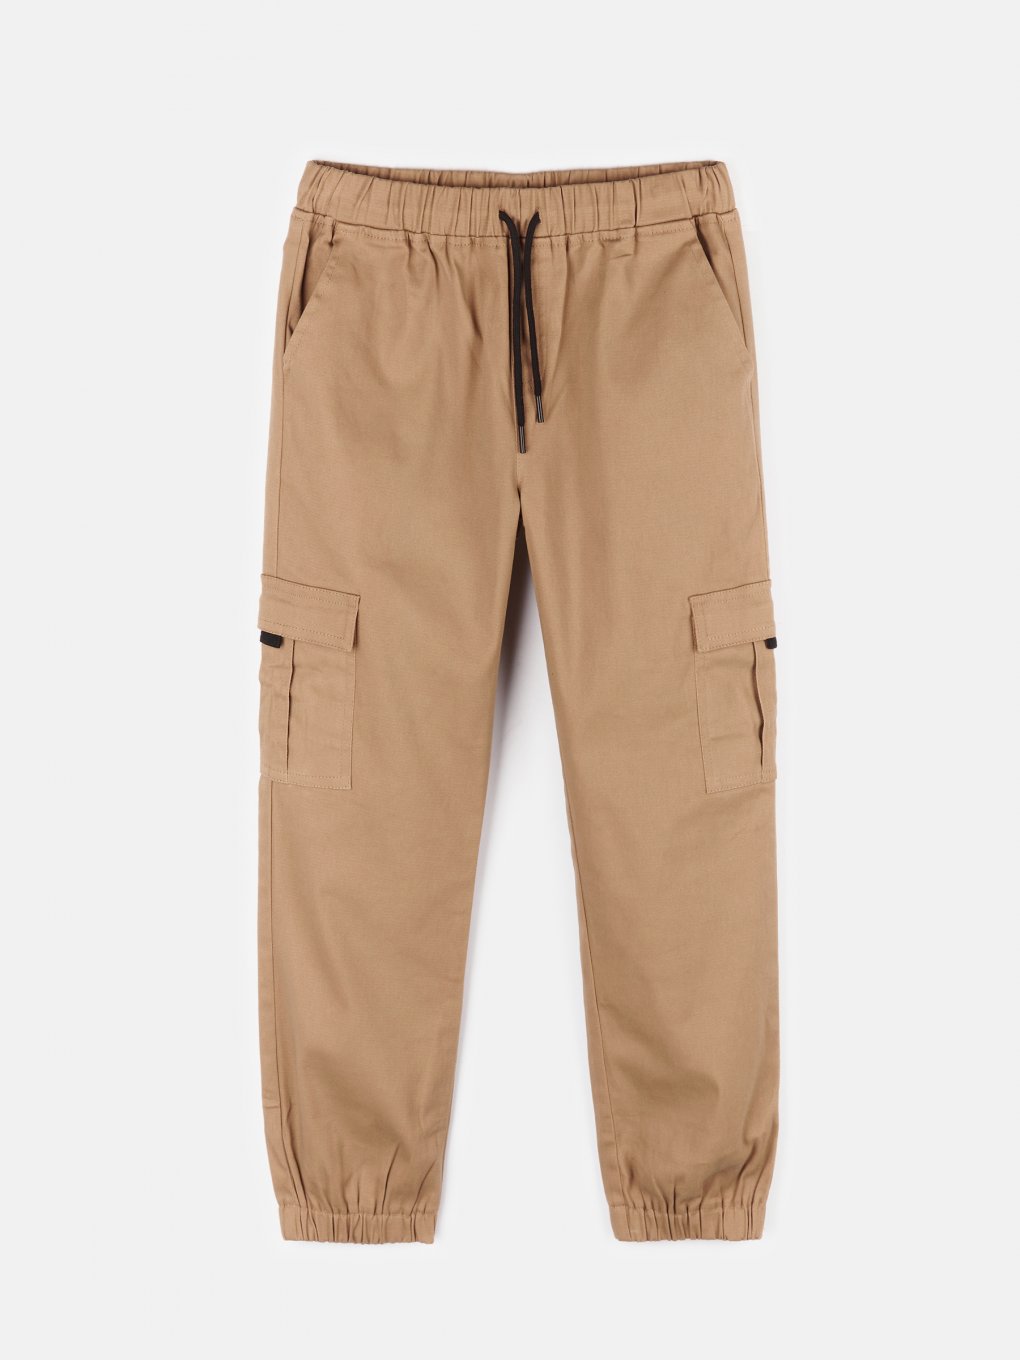 Jogger pants with pockets